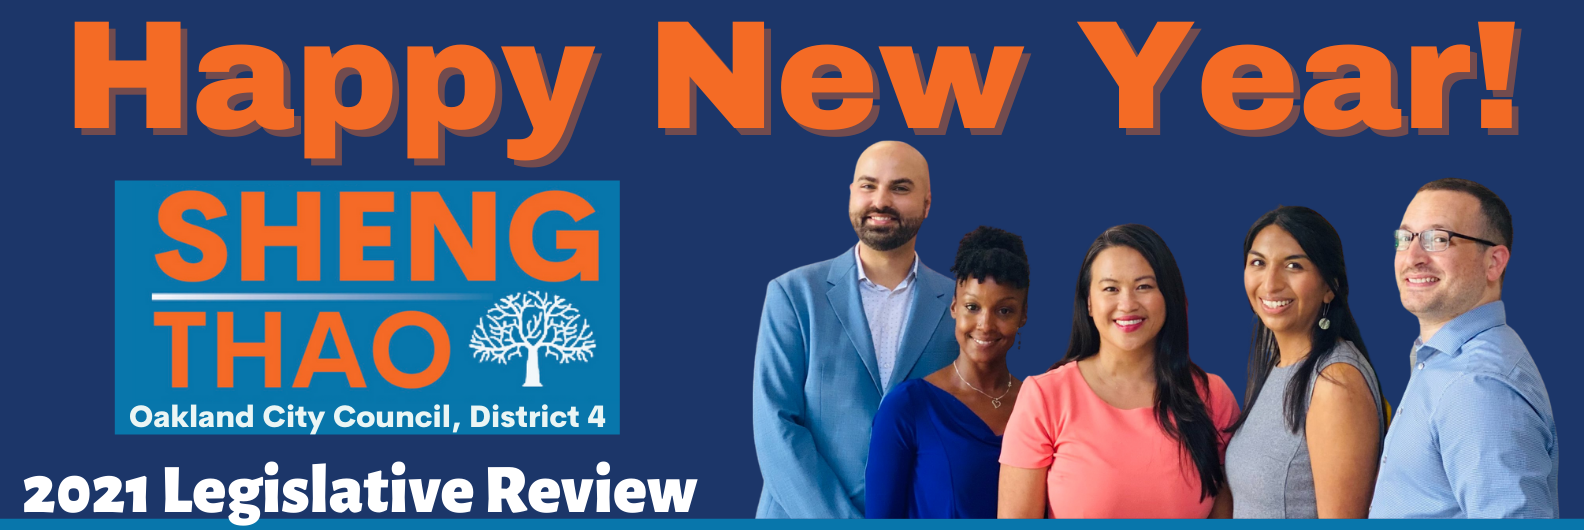 "Happy New Year" on top, with Councilmember Sheng Thao's logo below next to a photo of the Councilmember and her four staff and "2021 Legislative Review"